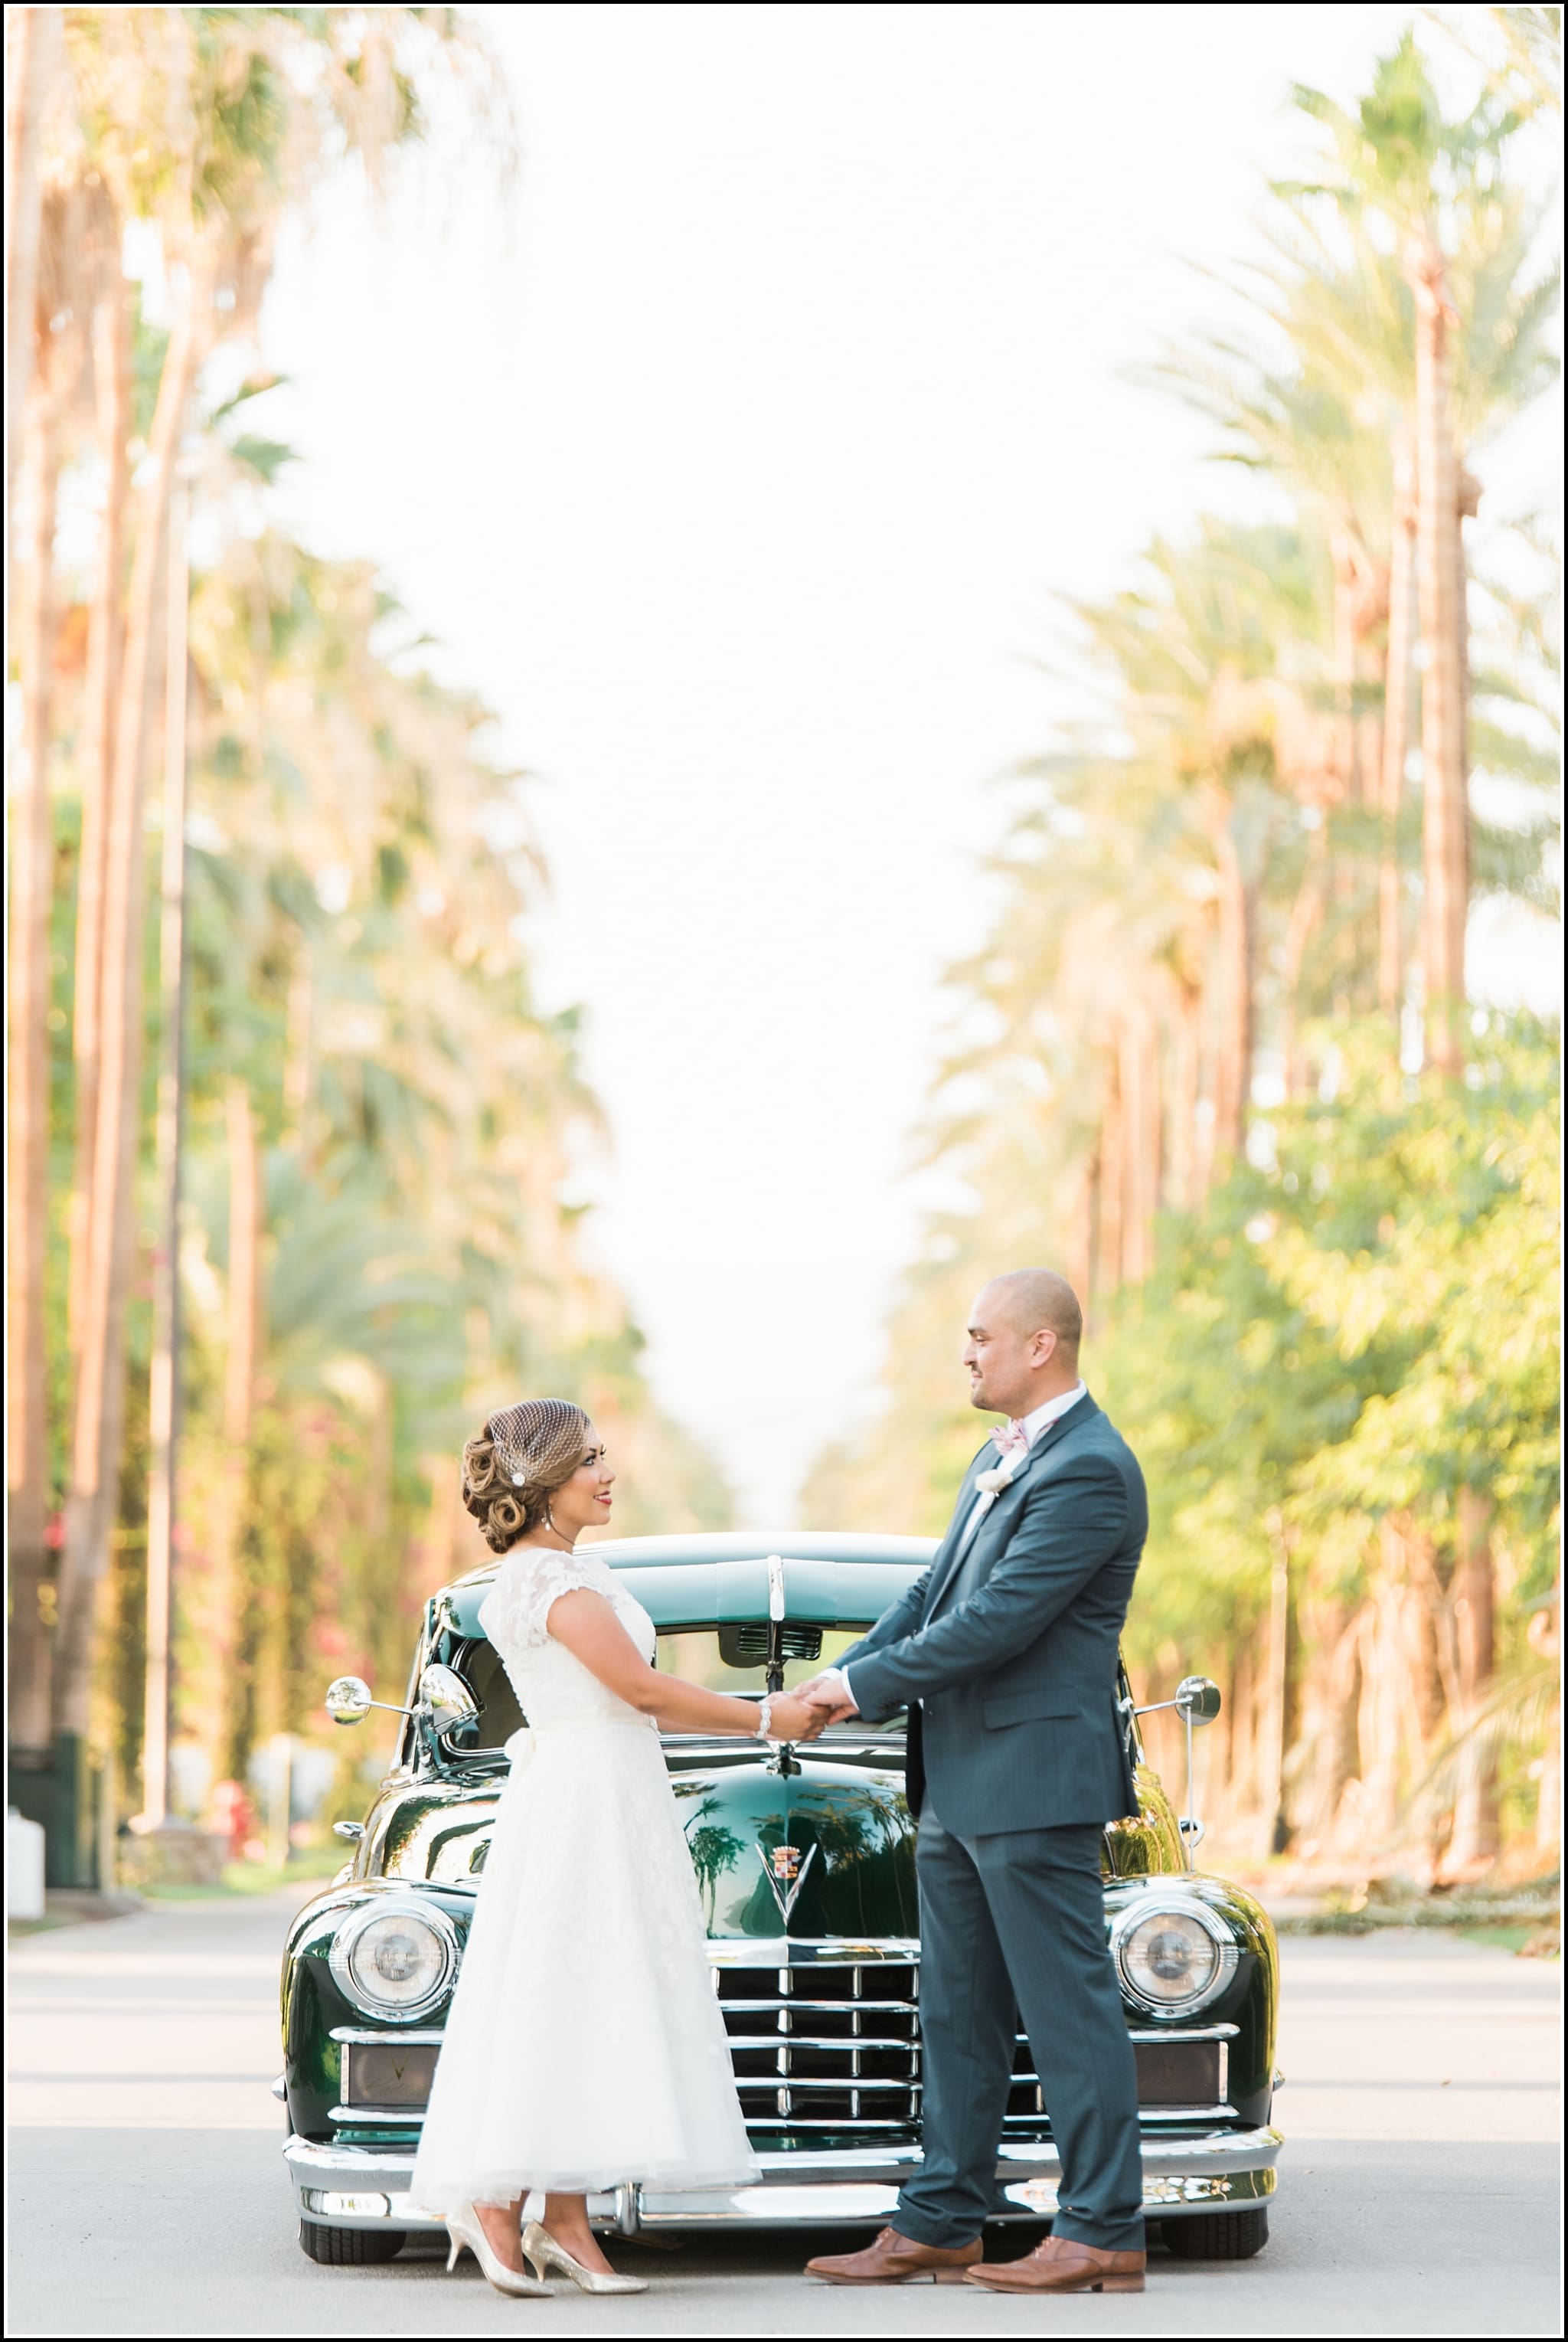  favorite wedding images 2016, wedding photos from 2016, our favorite wedding photos, coachella wedding, empire polo grounds wedding